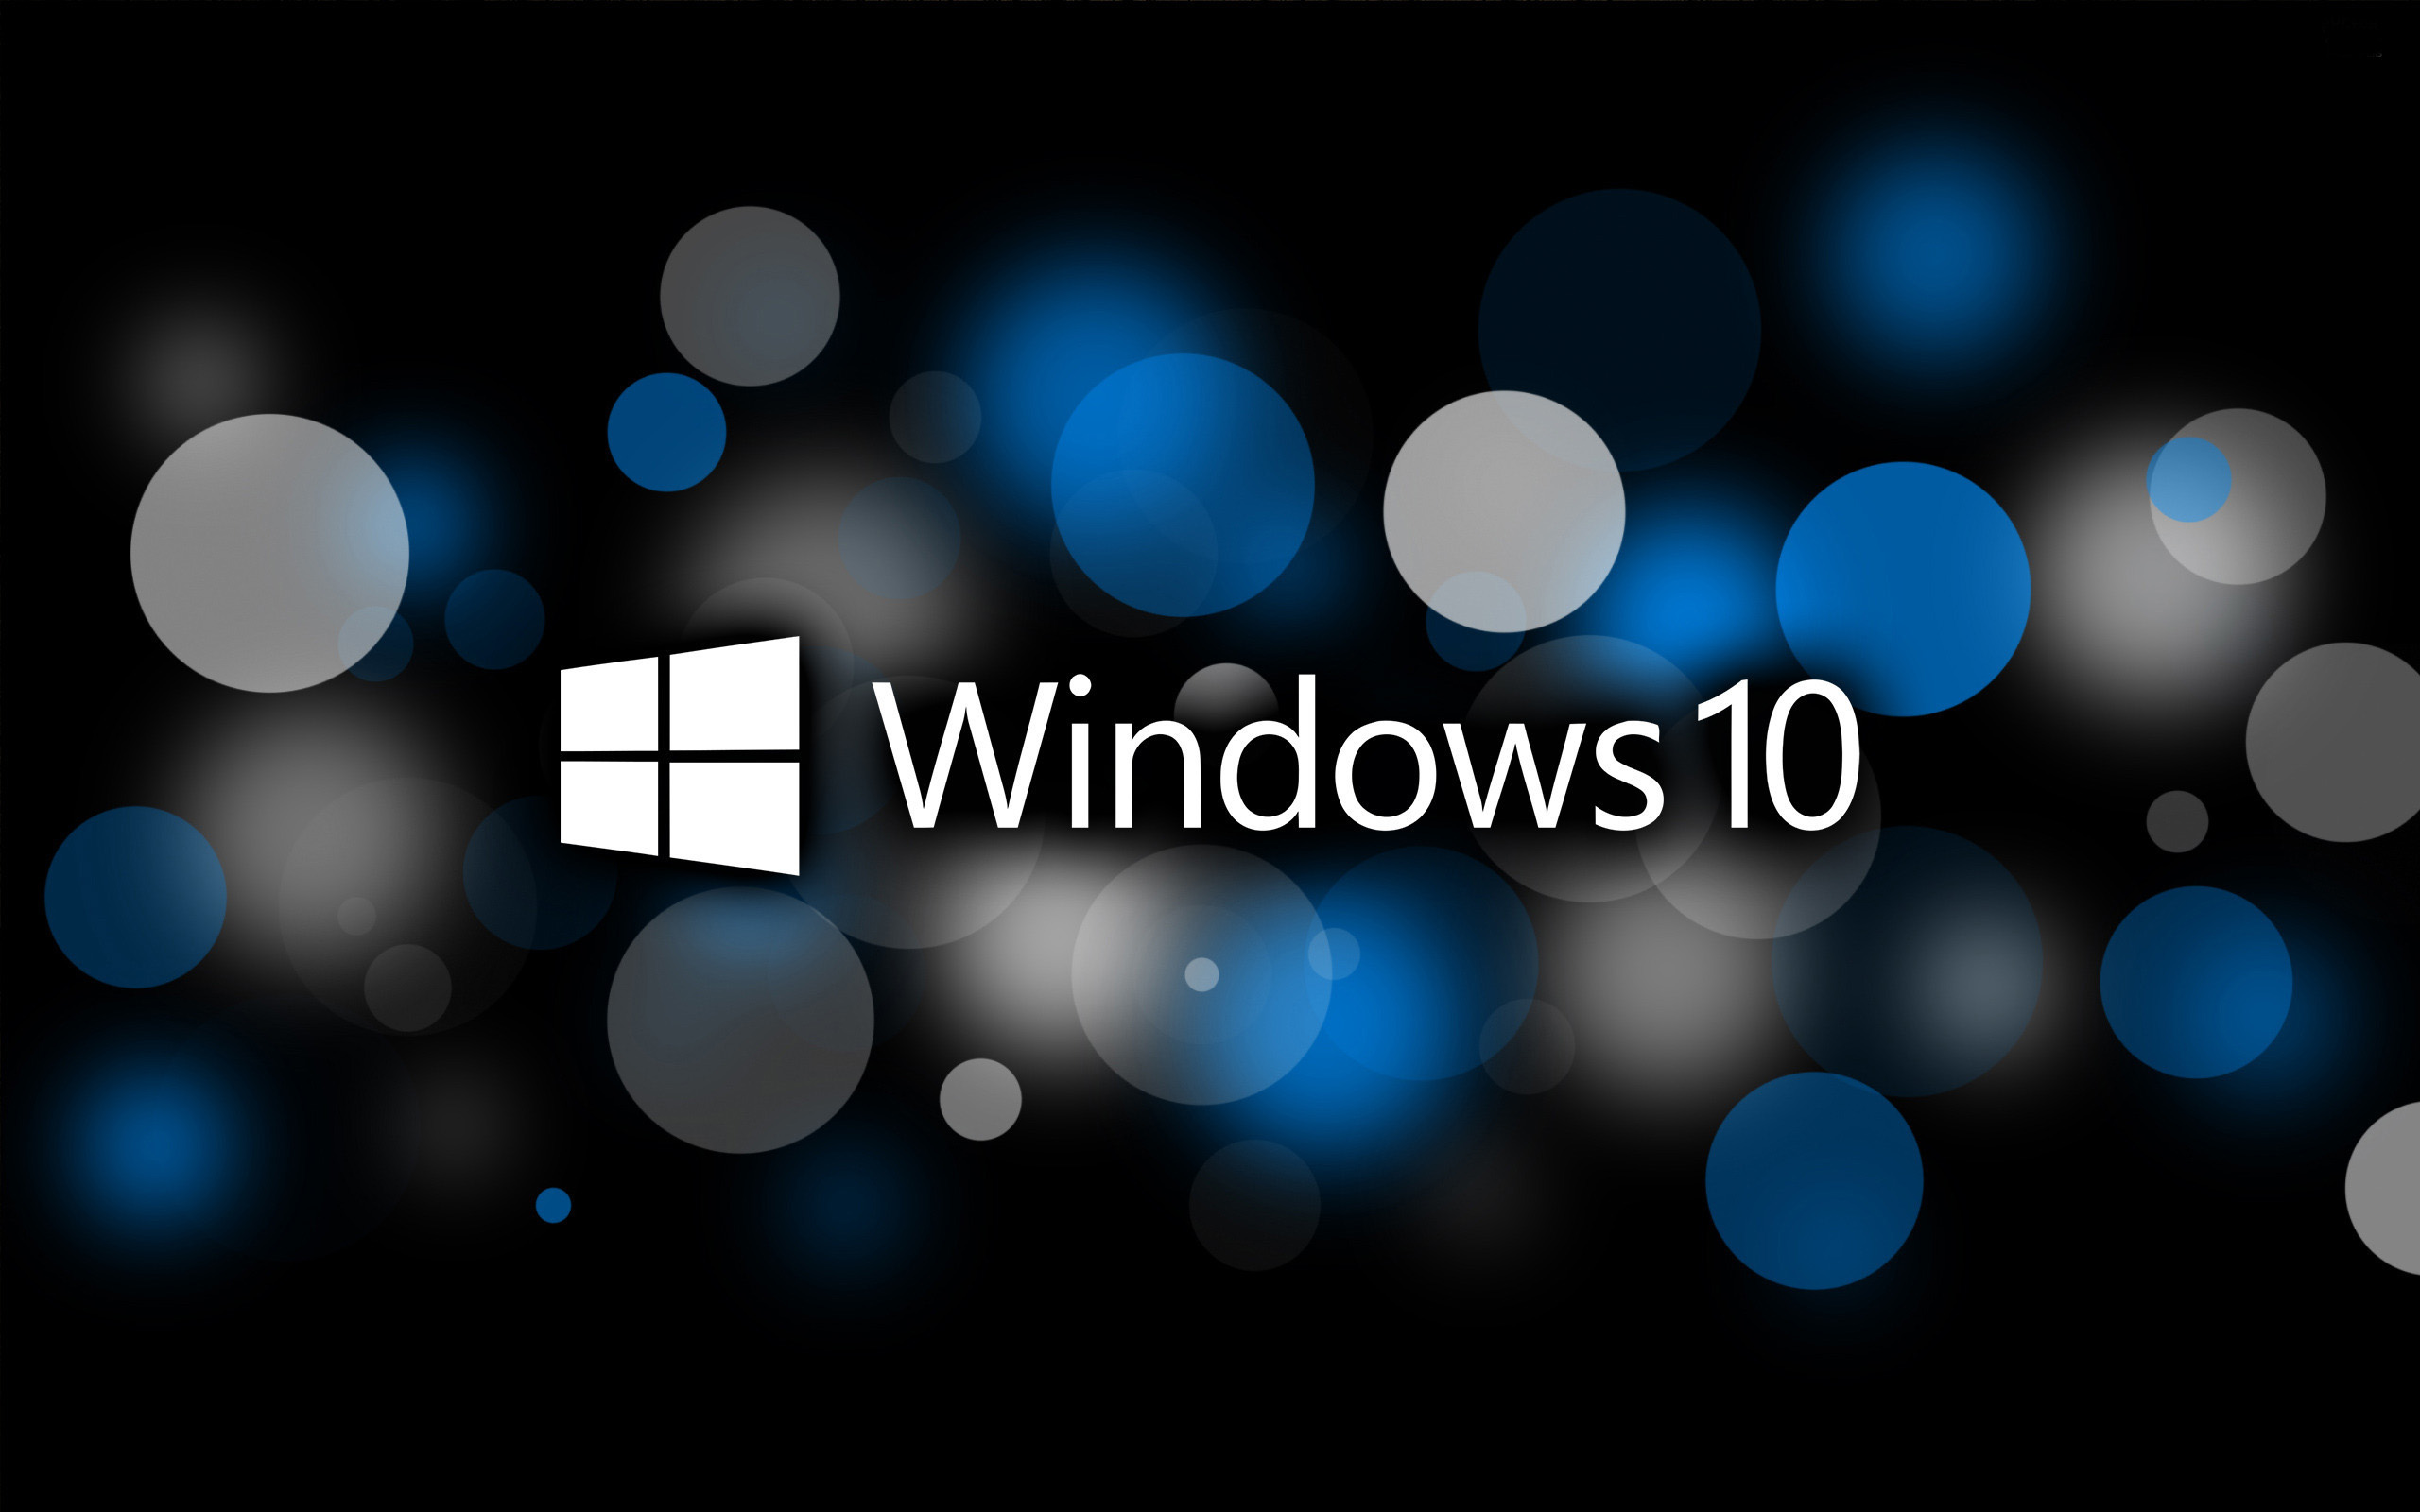 Windows 10 Wallpapers Free Download Group (79+)